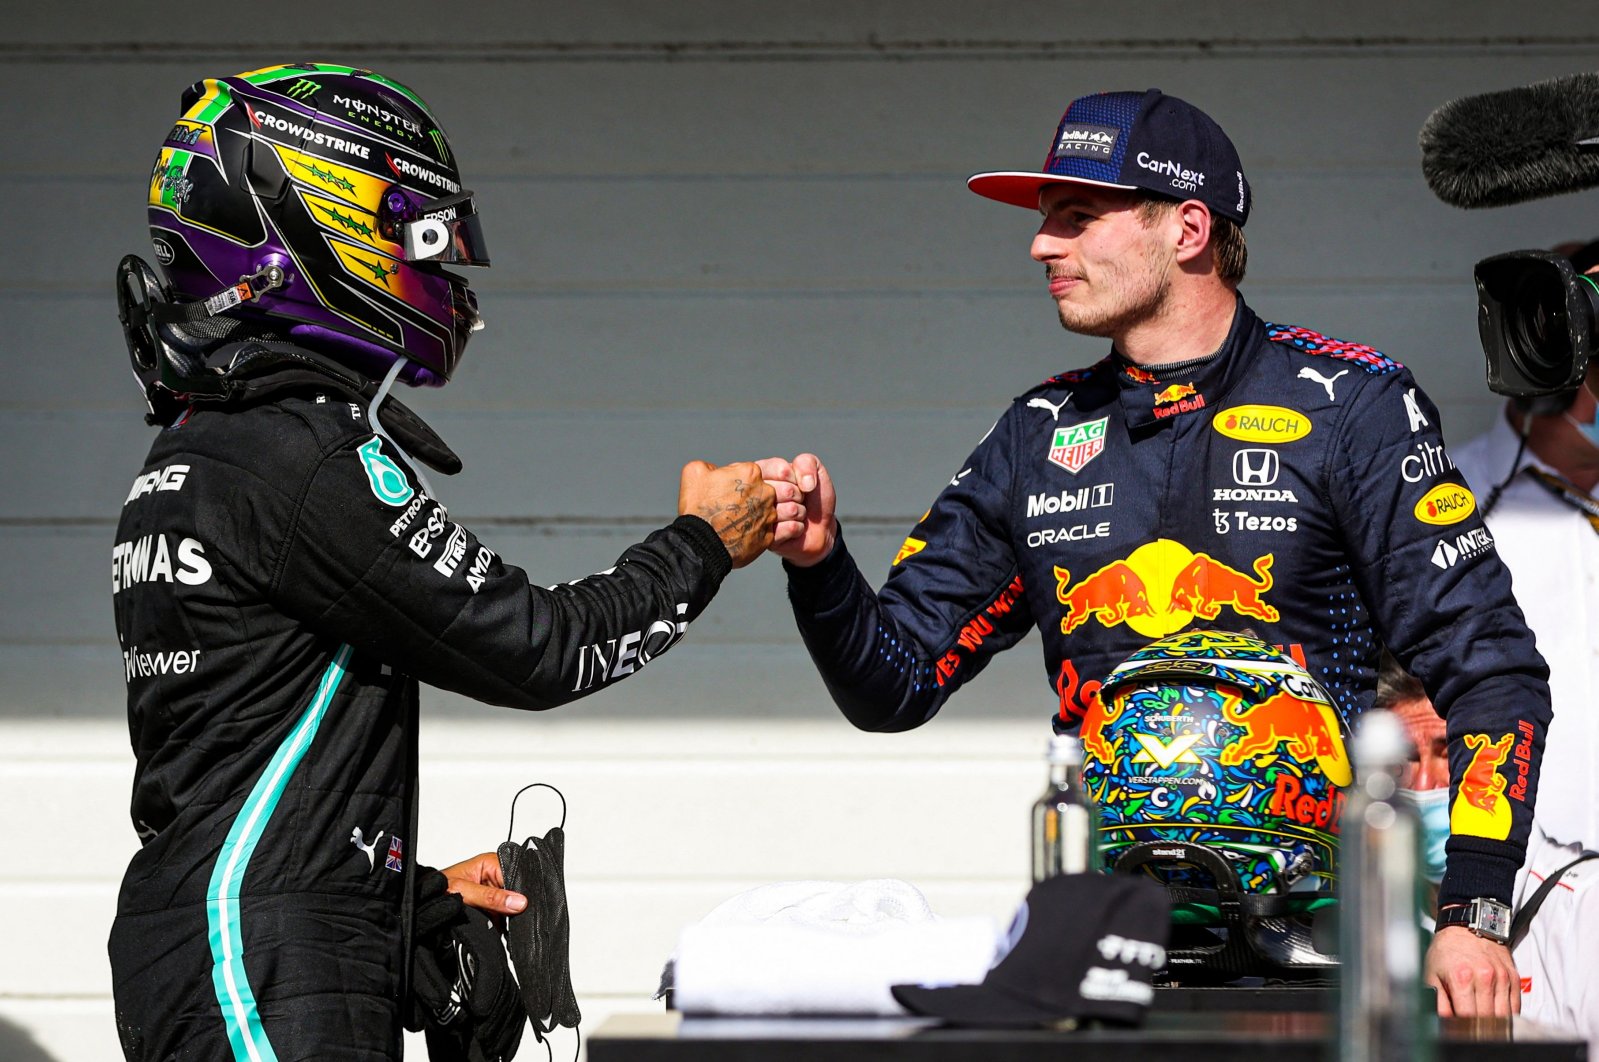 Mercedes&#039; Lewis Hamilton (L) and Red Bull&#039;s Max Verstappen (R) greet each other after obtaining the first and second positions in Sao Paulo Grand Prix, Sao Paulo, Brazil, Nov. 14, 2021. (AFP Photo)